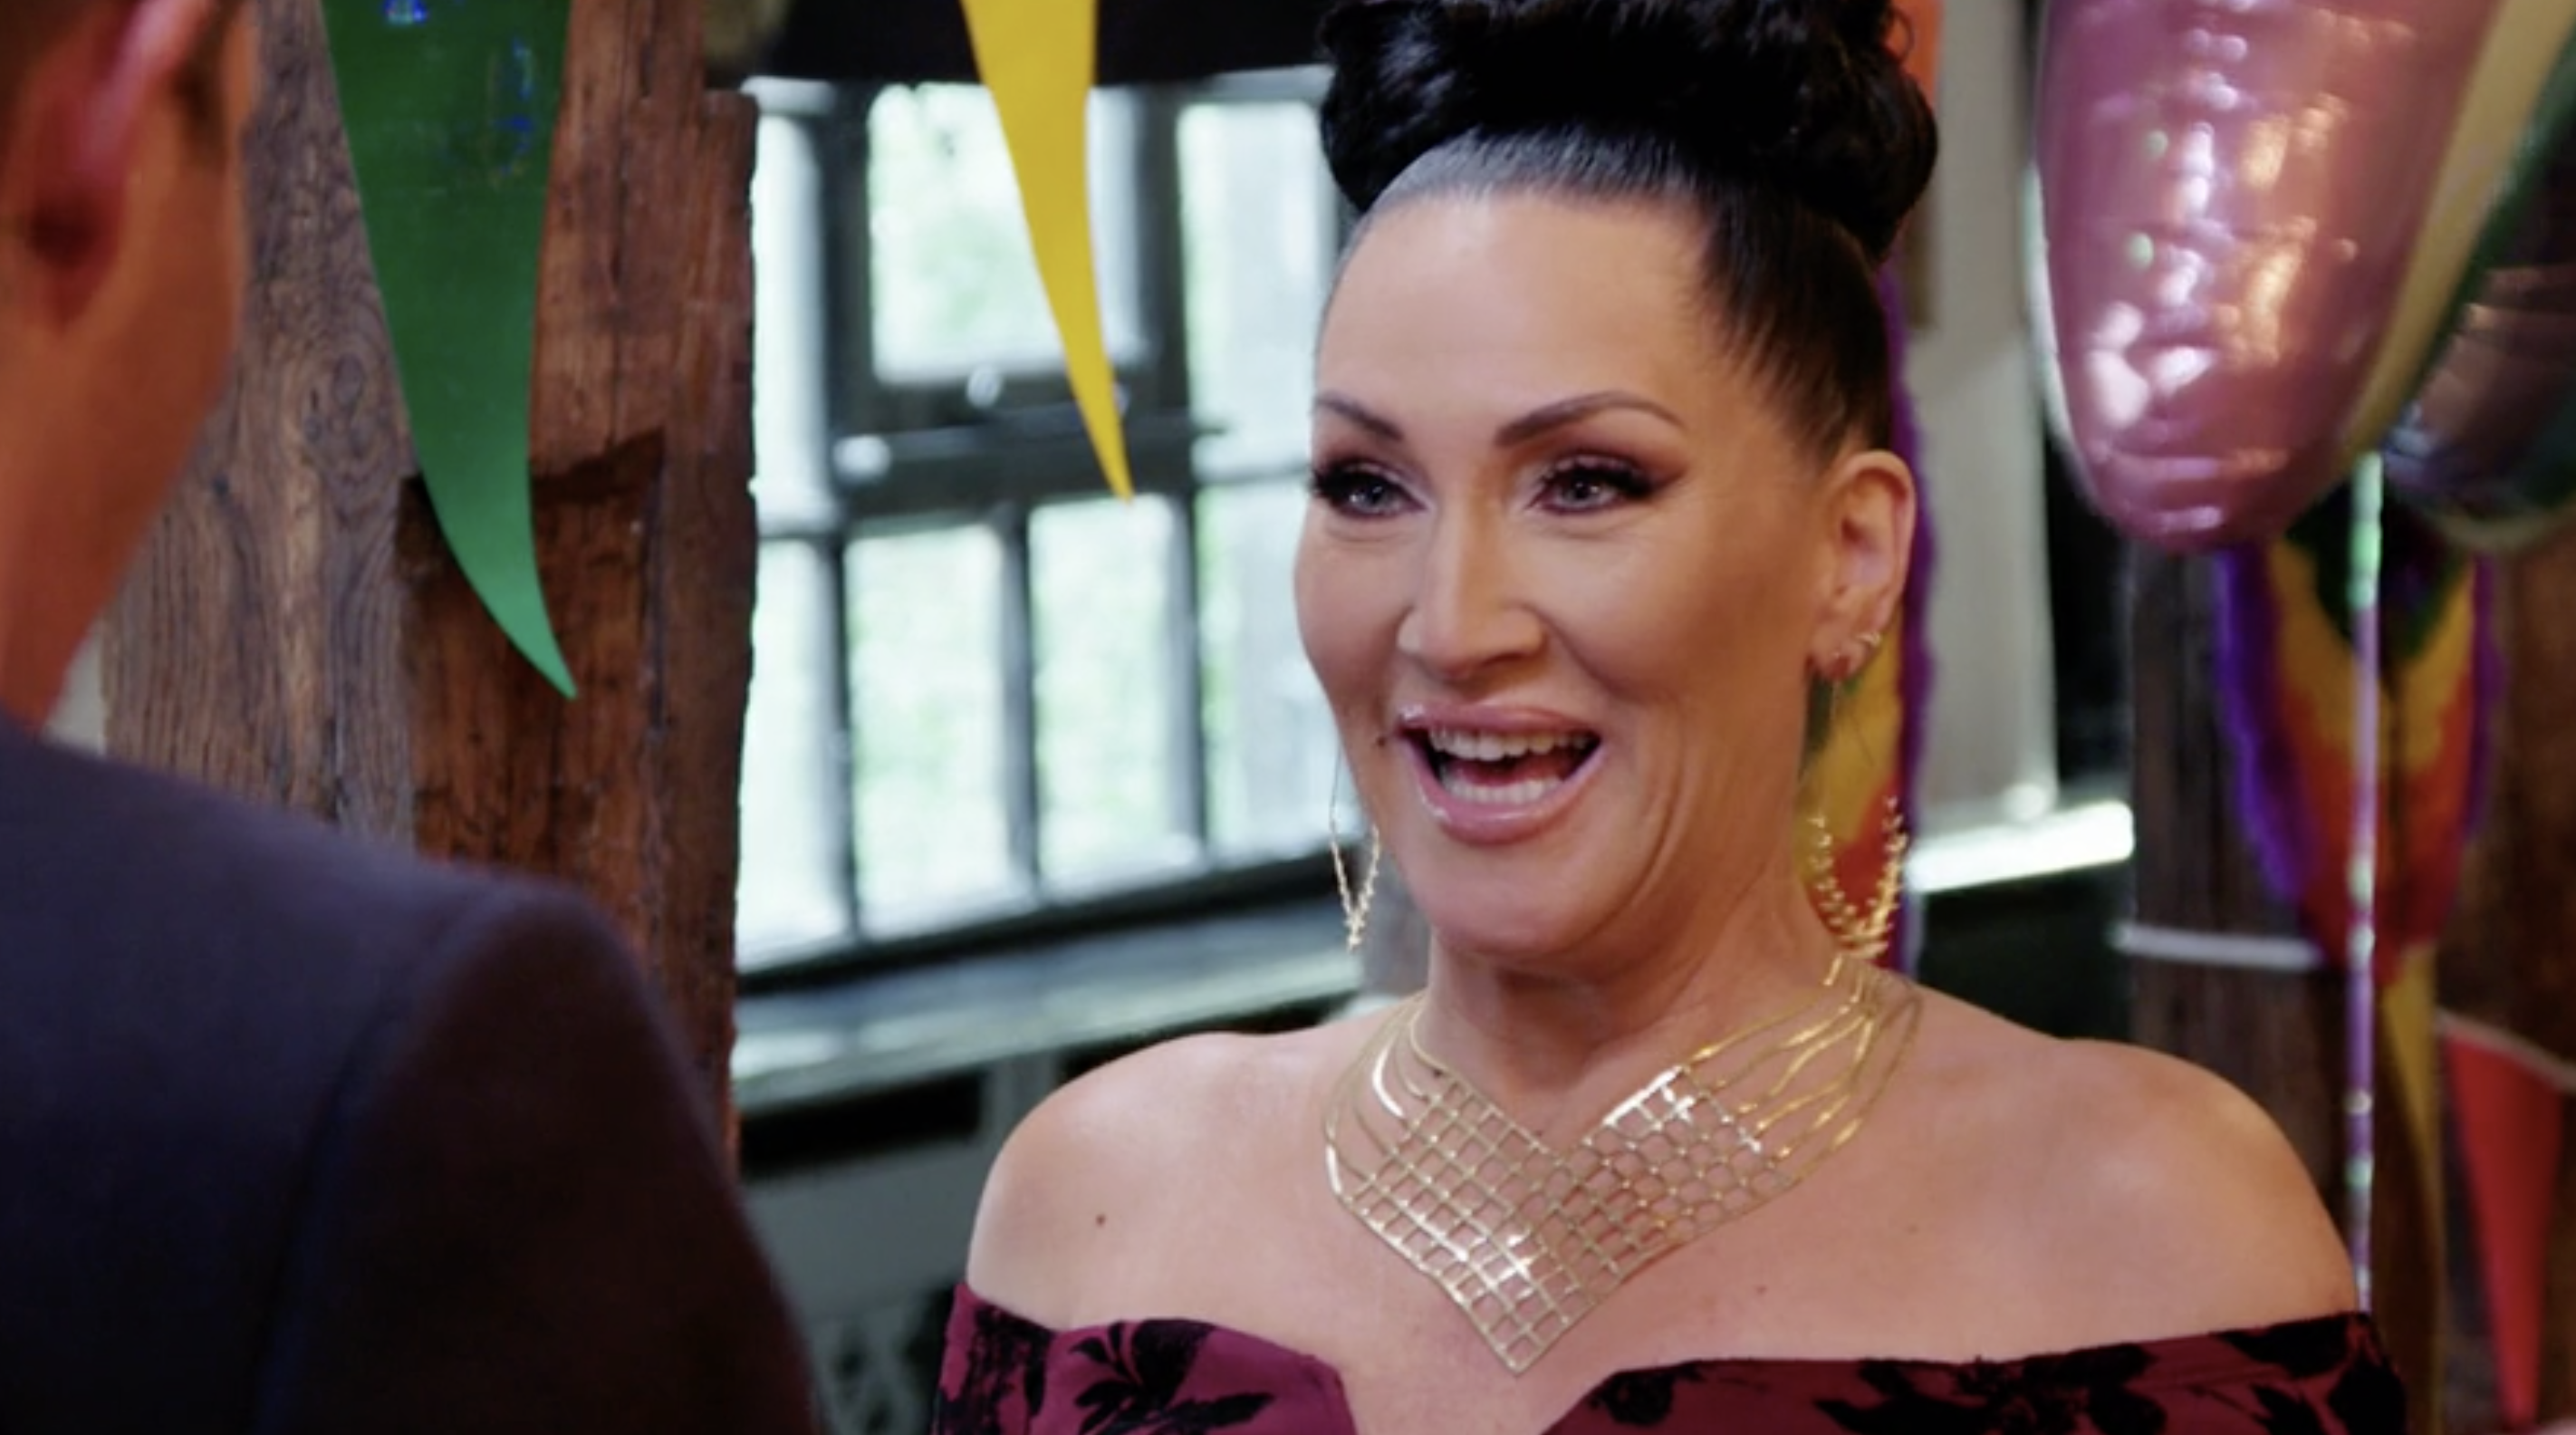 Who is Michelle Visage? Why did she show up on TOWIE to see Bobby Norris in episode 5?